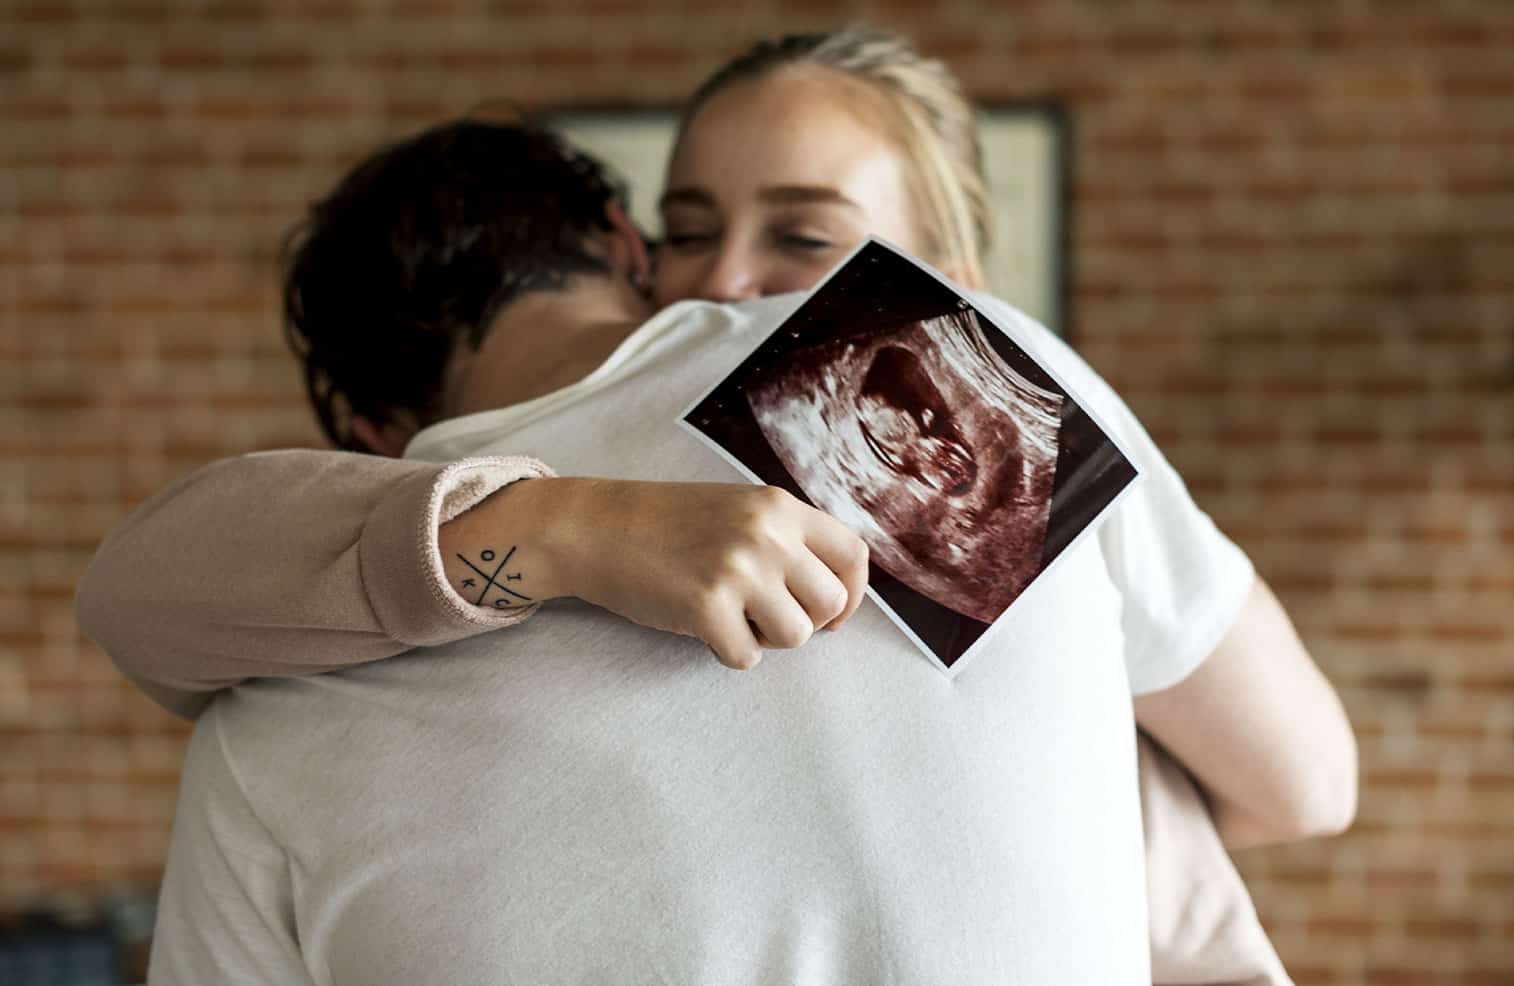 Pregnancy can be a turbulent time, especially as a couple. These are some of the ways you can stay connected to your husband during pregnancy and keep your relationship strong.